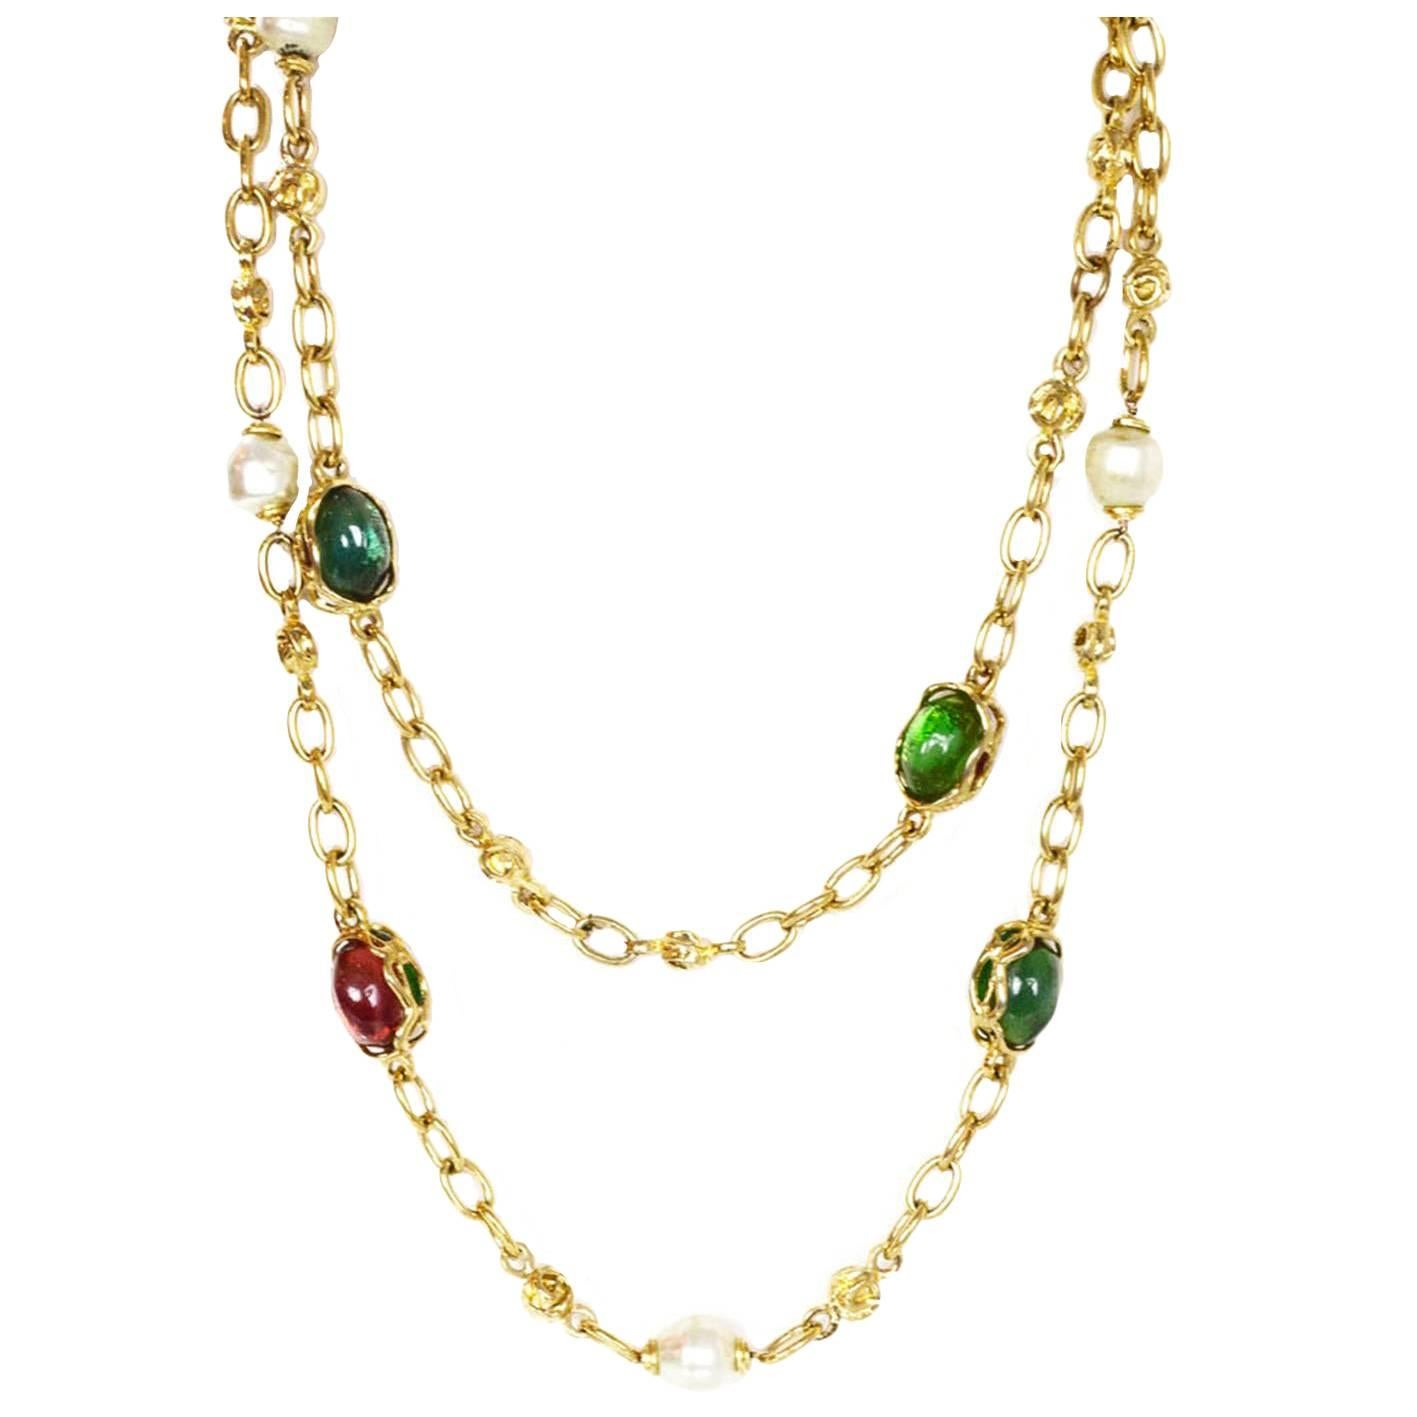 Yves Saint Laurent Faux Pearl And Glass Goldtone Necklace